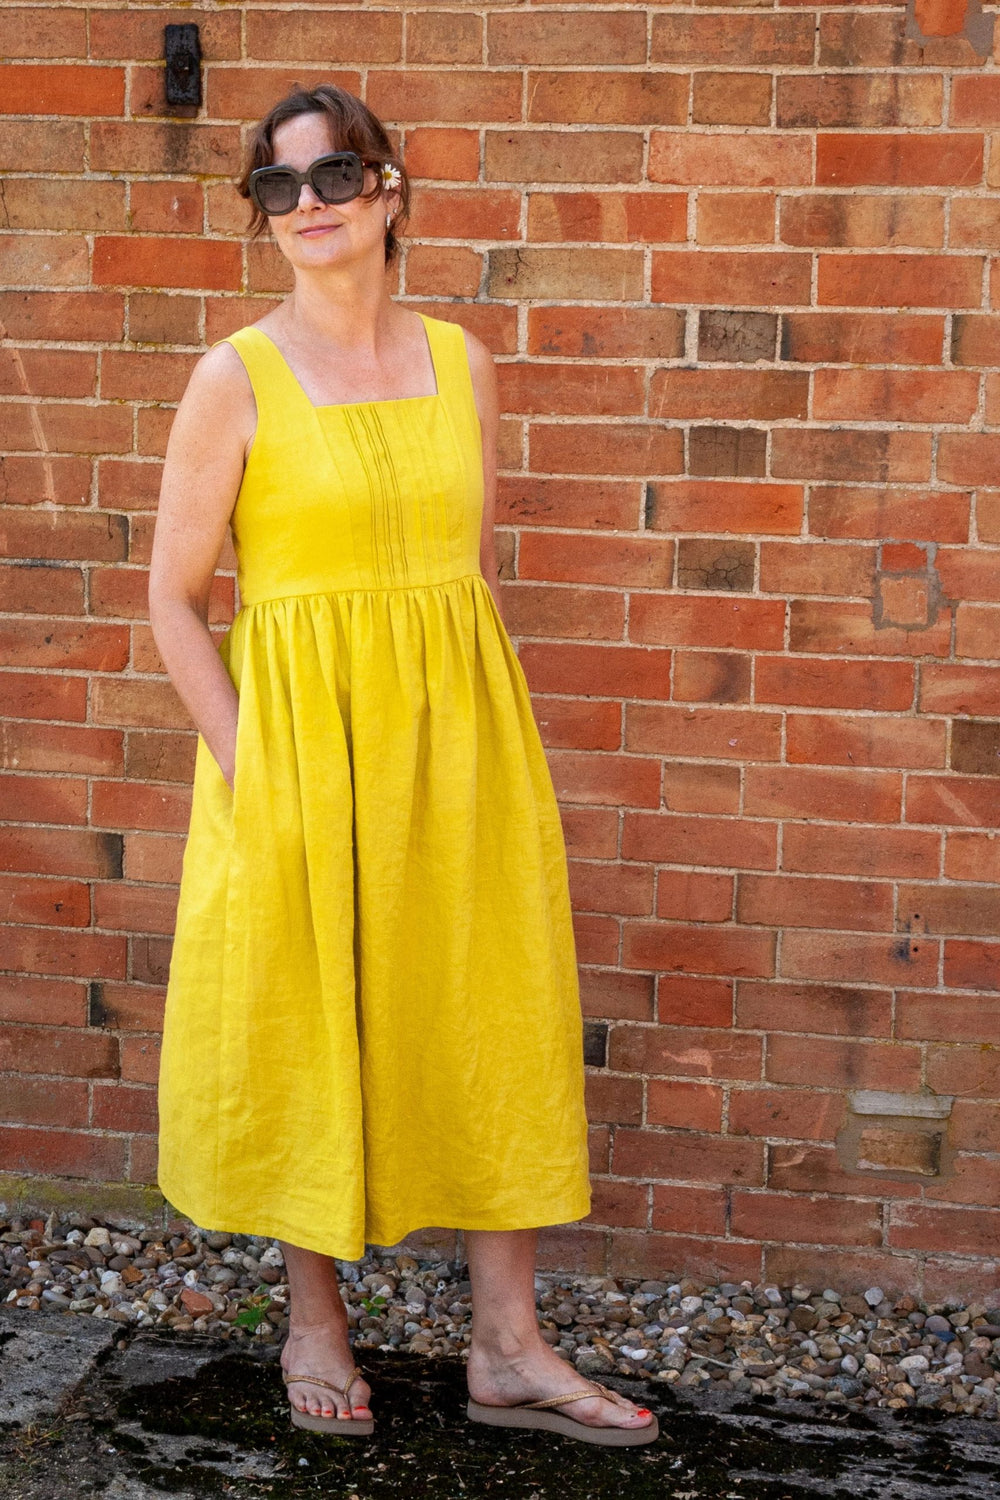 Woman wearing the Lavinia Dress sewing pattern from Sew Me Something on The Fold Line. A sleeveless dress pattern made in linen, viscose rayon, double gauze, cotton lawn or broderie anglaise fabrics, featuring a square neckline, shirred back with ties, br